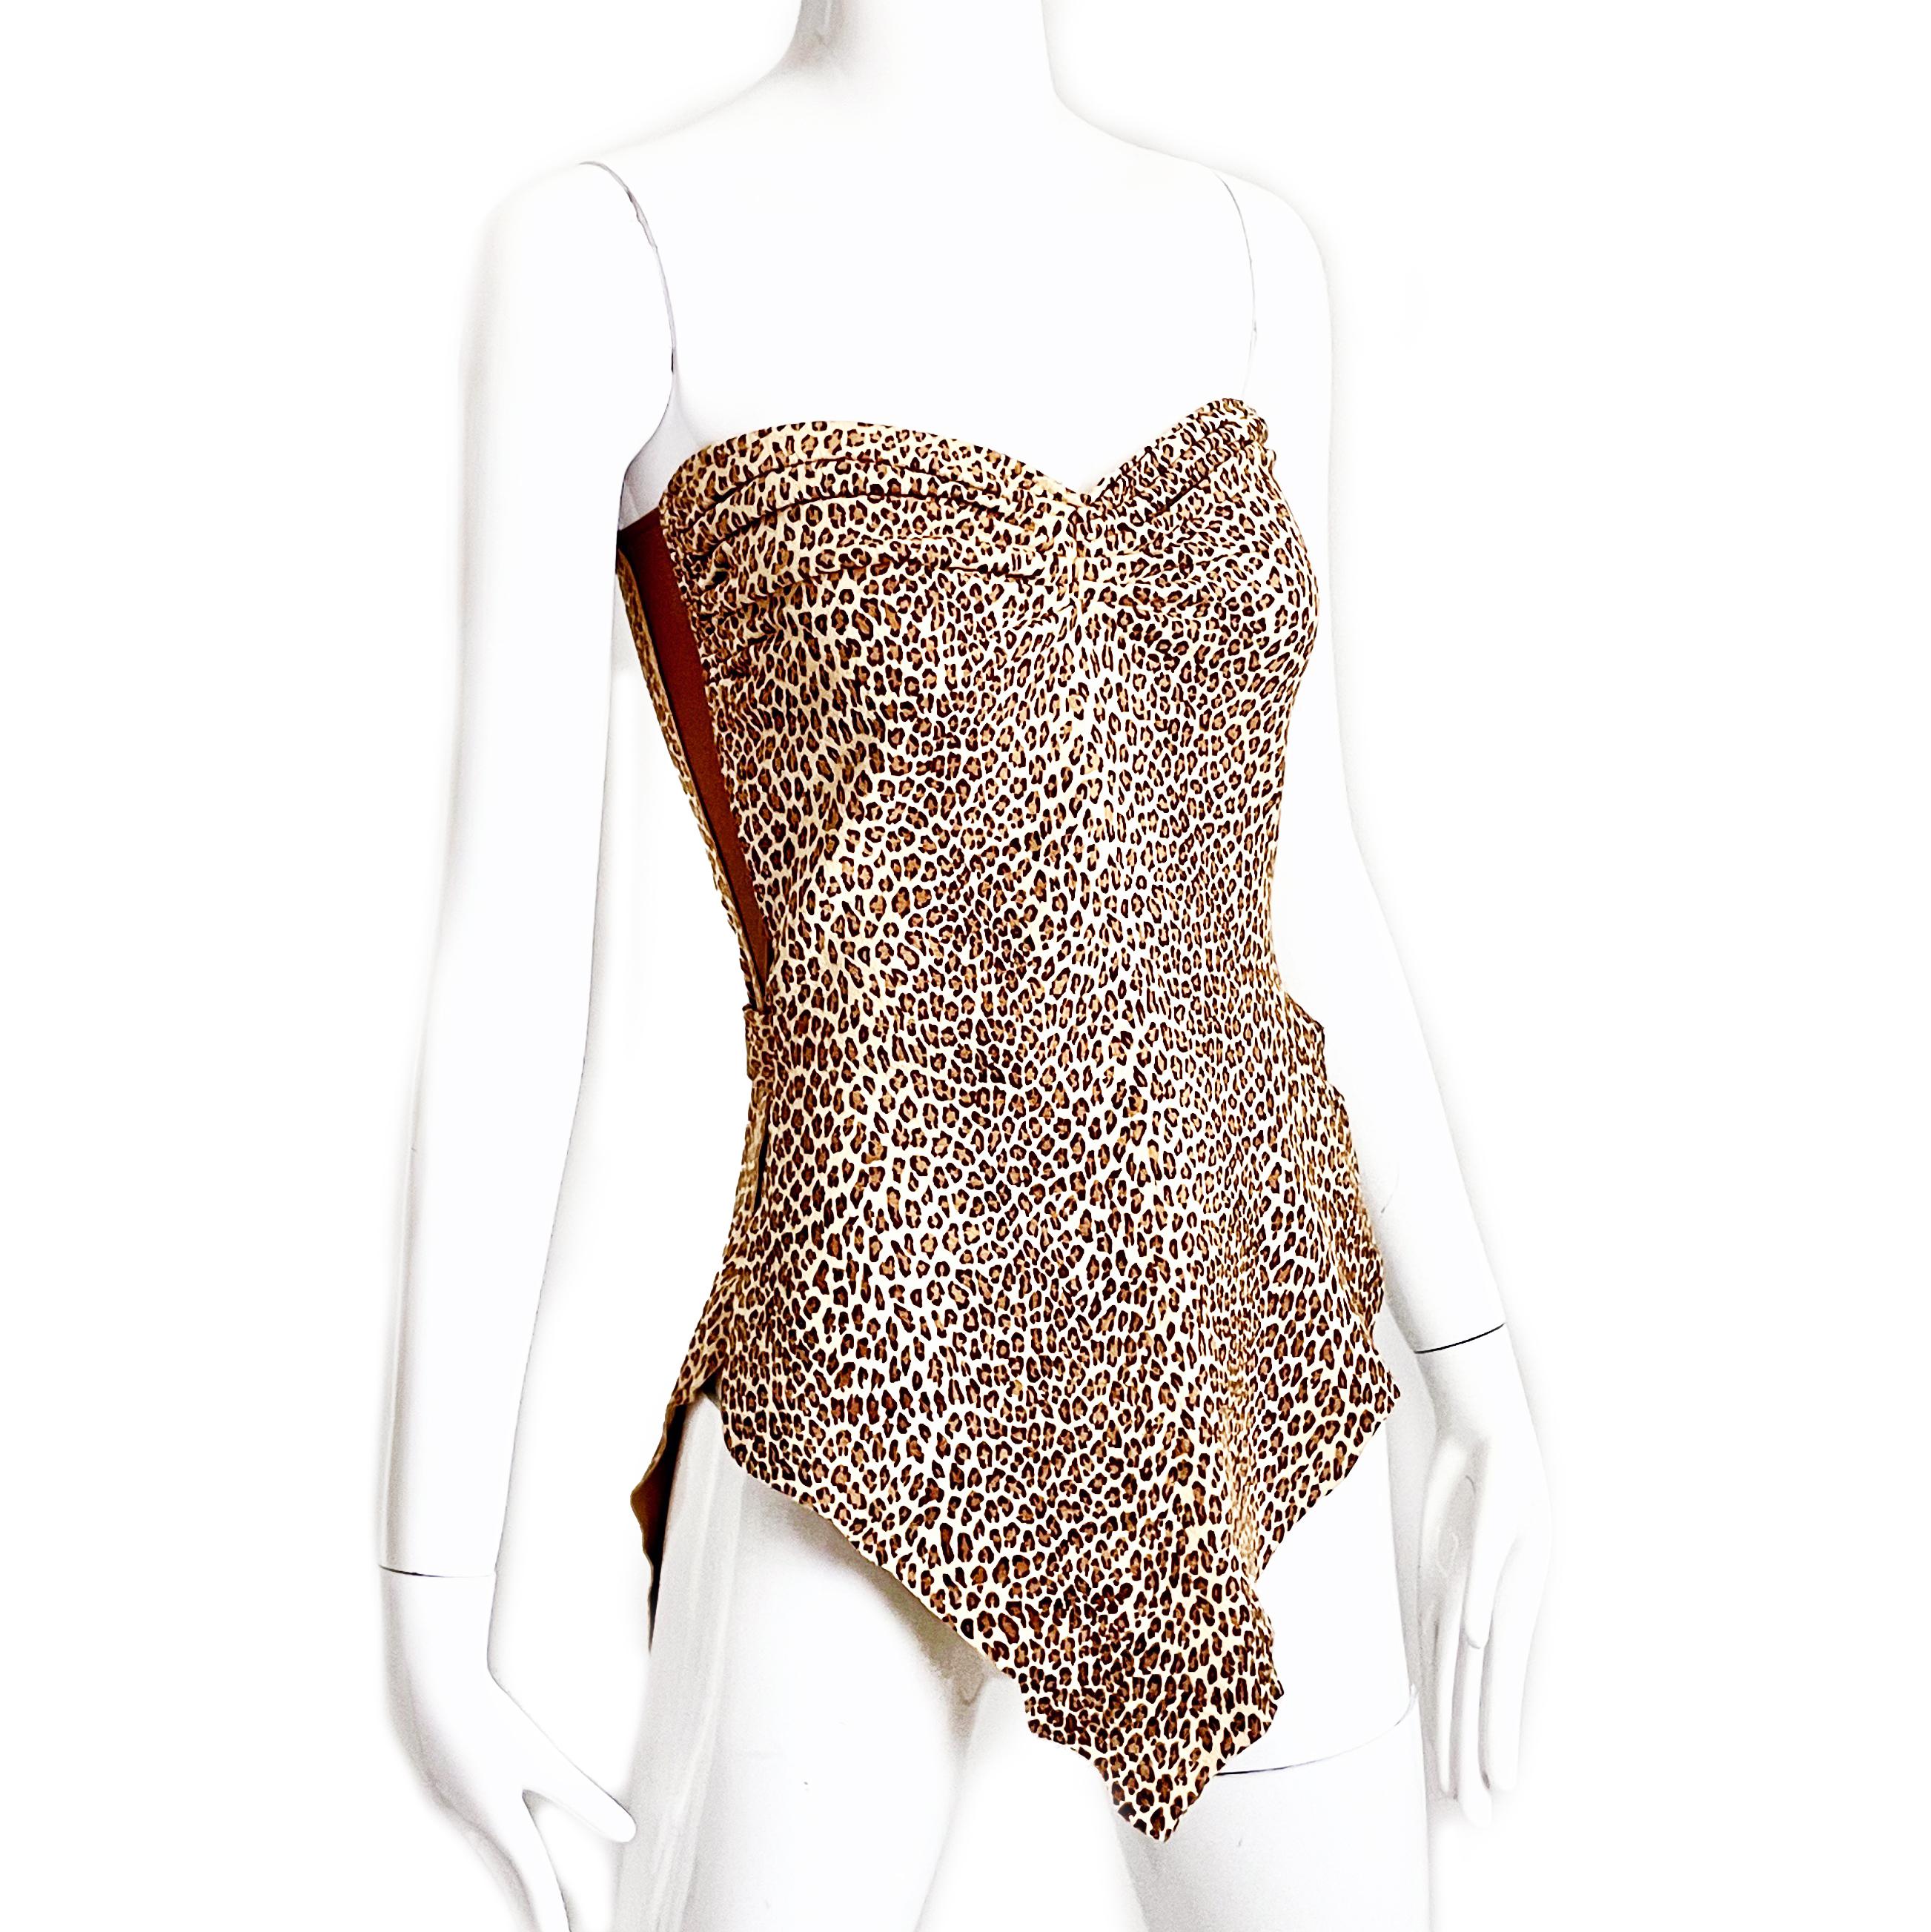 Norma Kamali OMO Leather Corset Top with Wrap Ties Leopard Print Vintage HTF For Sale 11